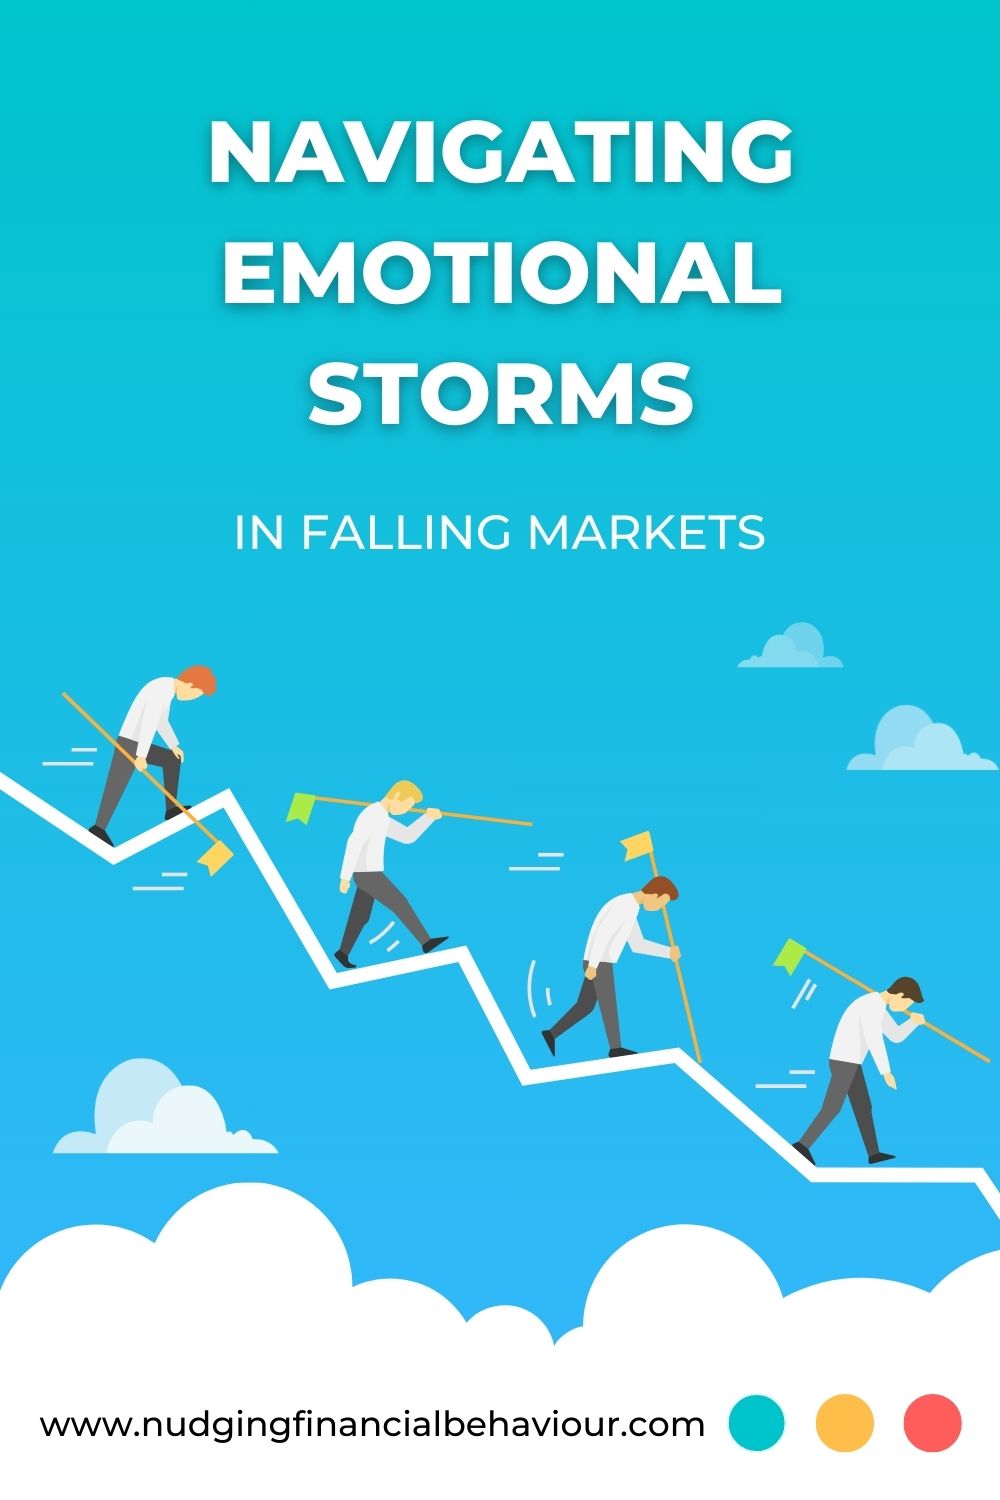 Emotional storms in falling markets